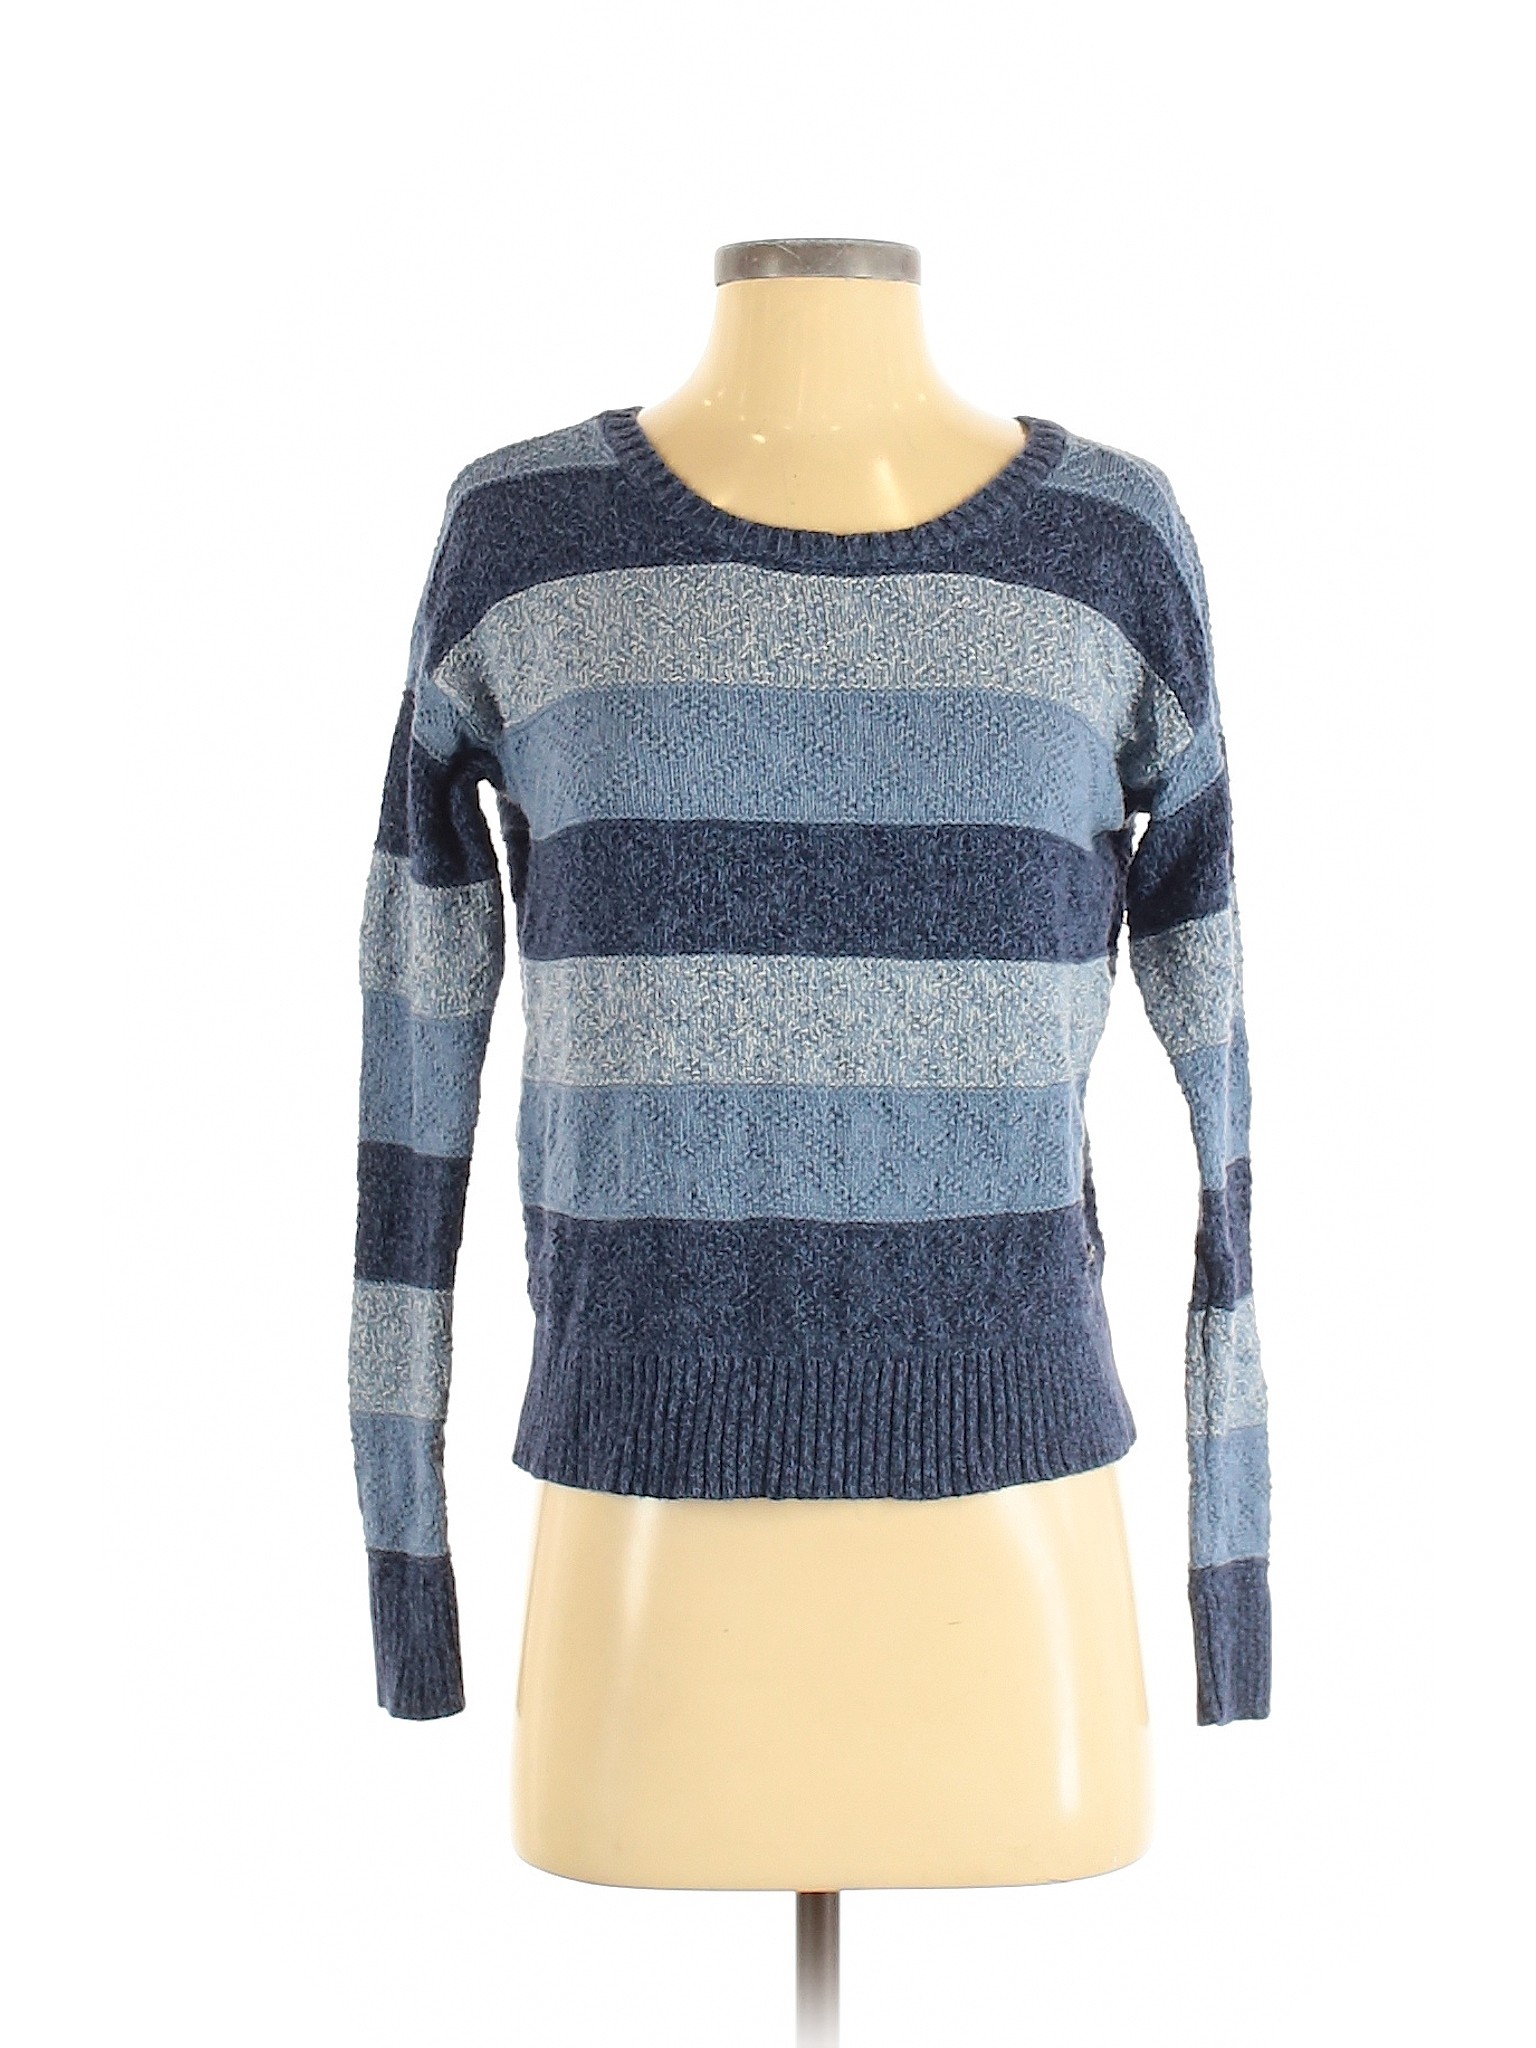 American Eagle Outfitters Women Blue Pullover Sweater XS | eBay